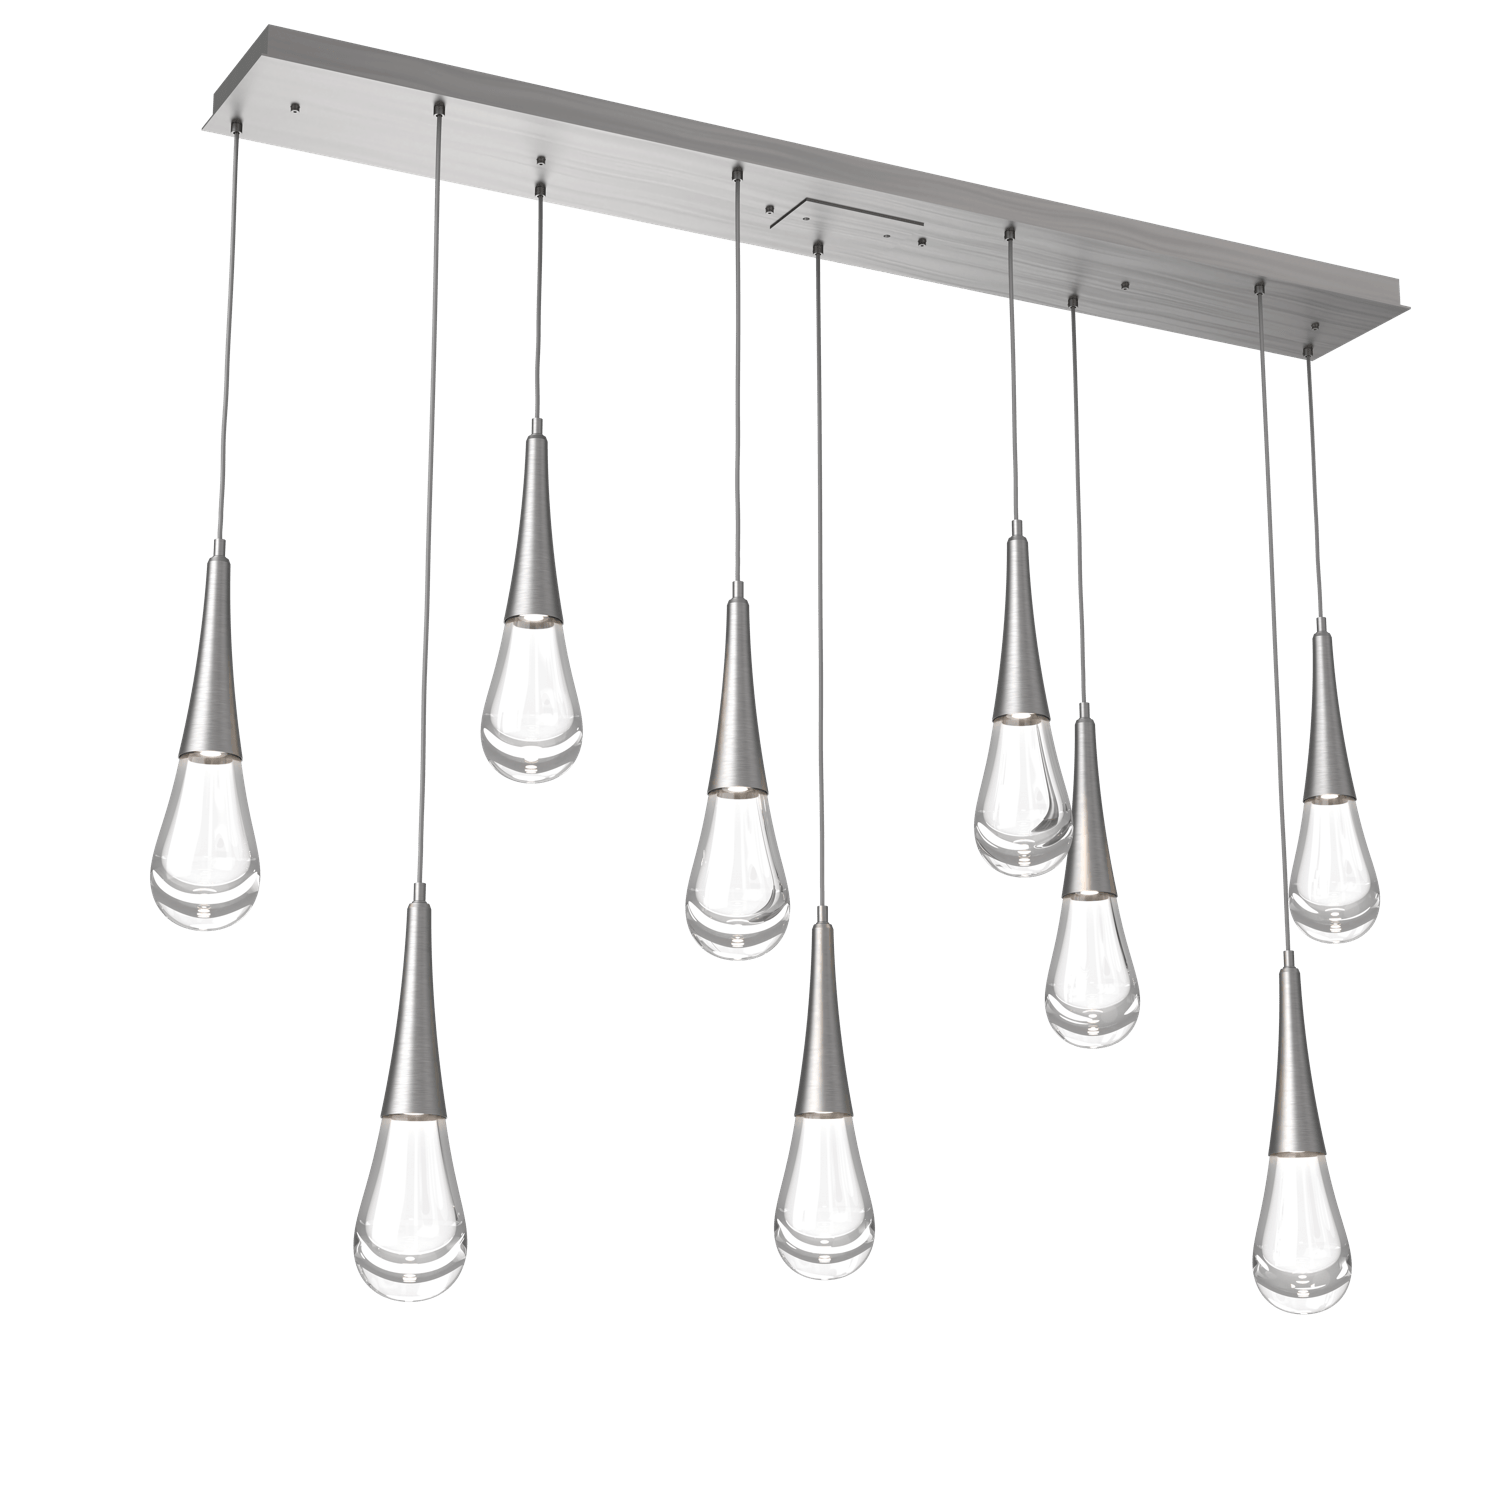 PLB0078-09-SN-Hammerton-Studio-Raindrop-9-light-linear-pendant-chandelier-with-satin-nickel-finish-and-clear-blown-glass-shades-and-LED-lamping